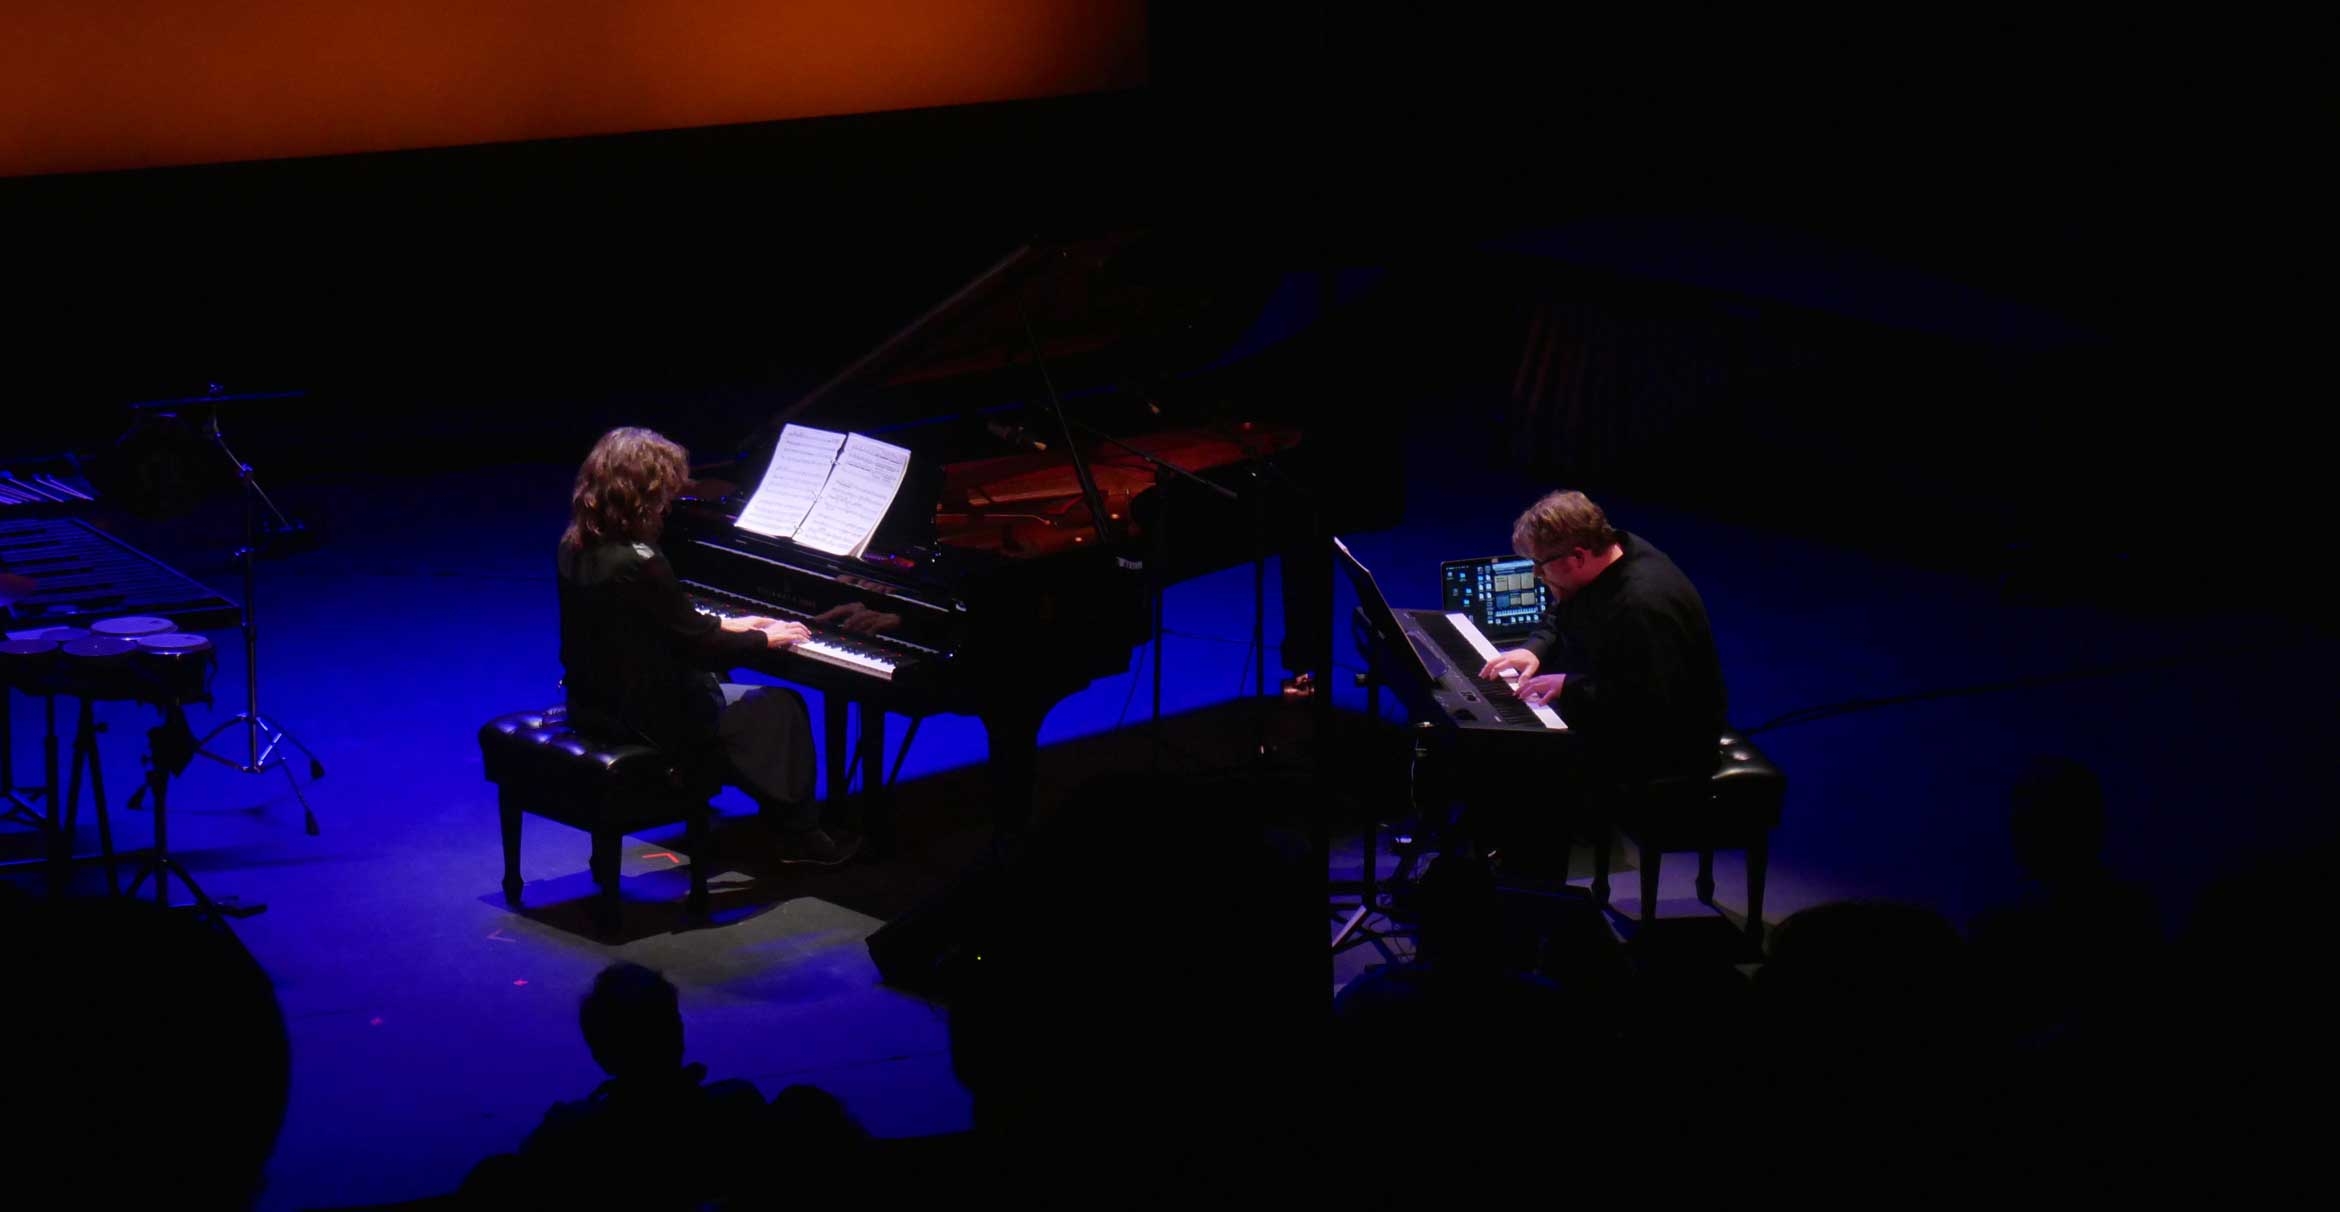 Two pianists play facing each other on a darkened stage